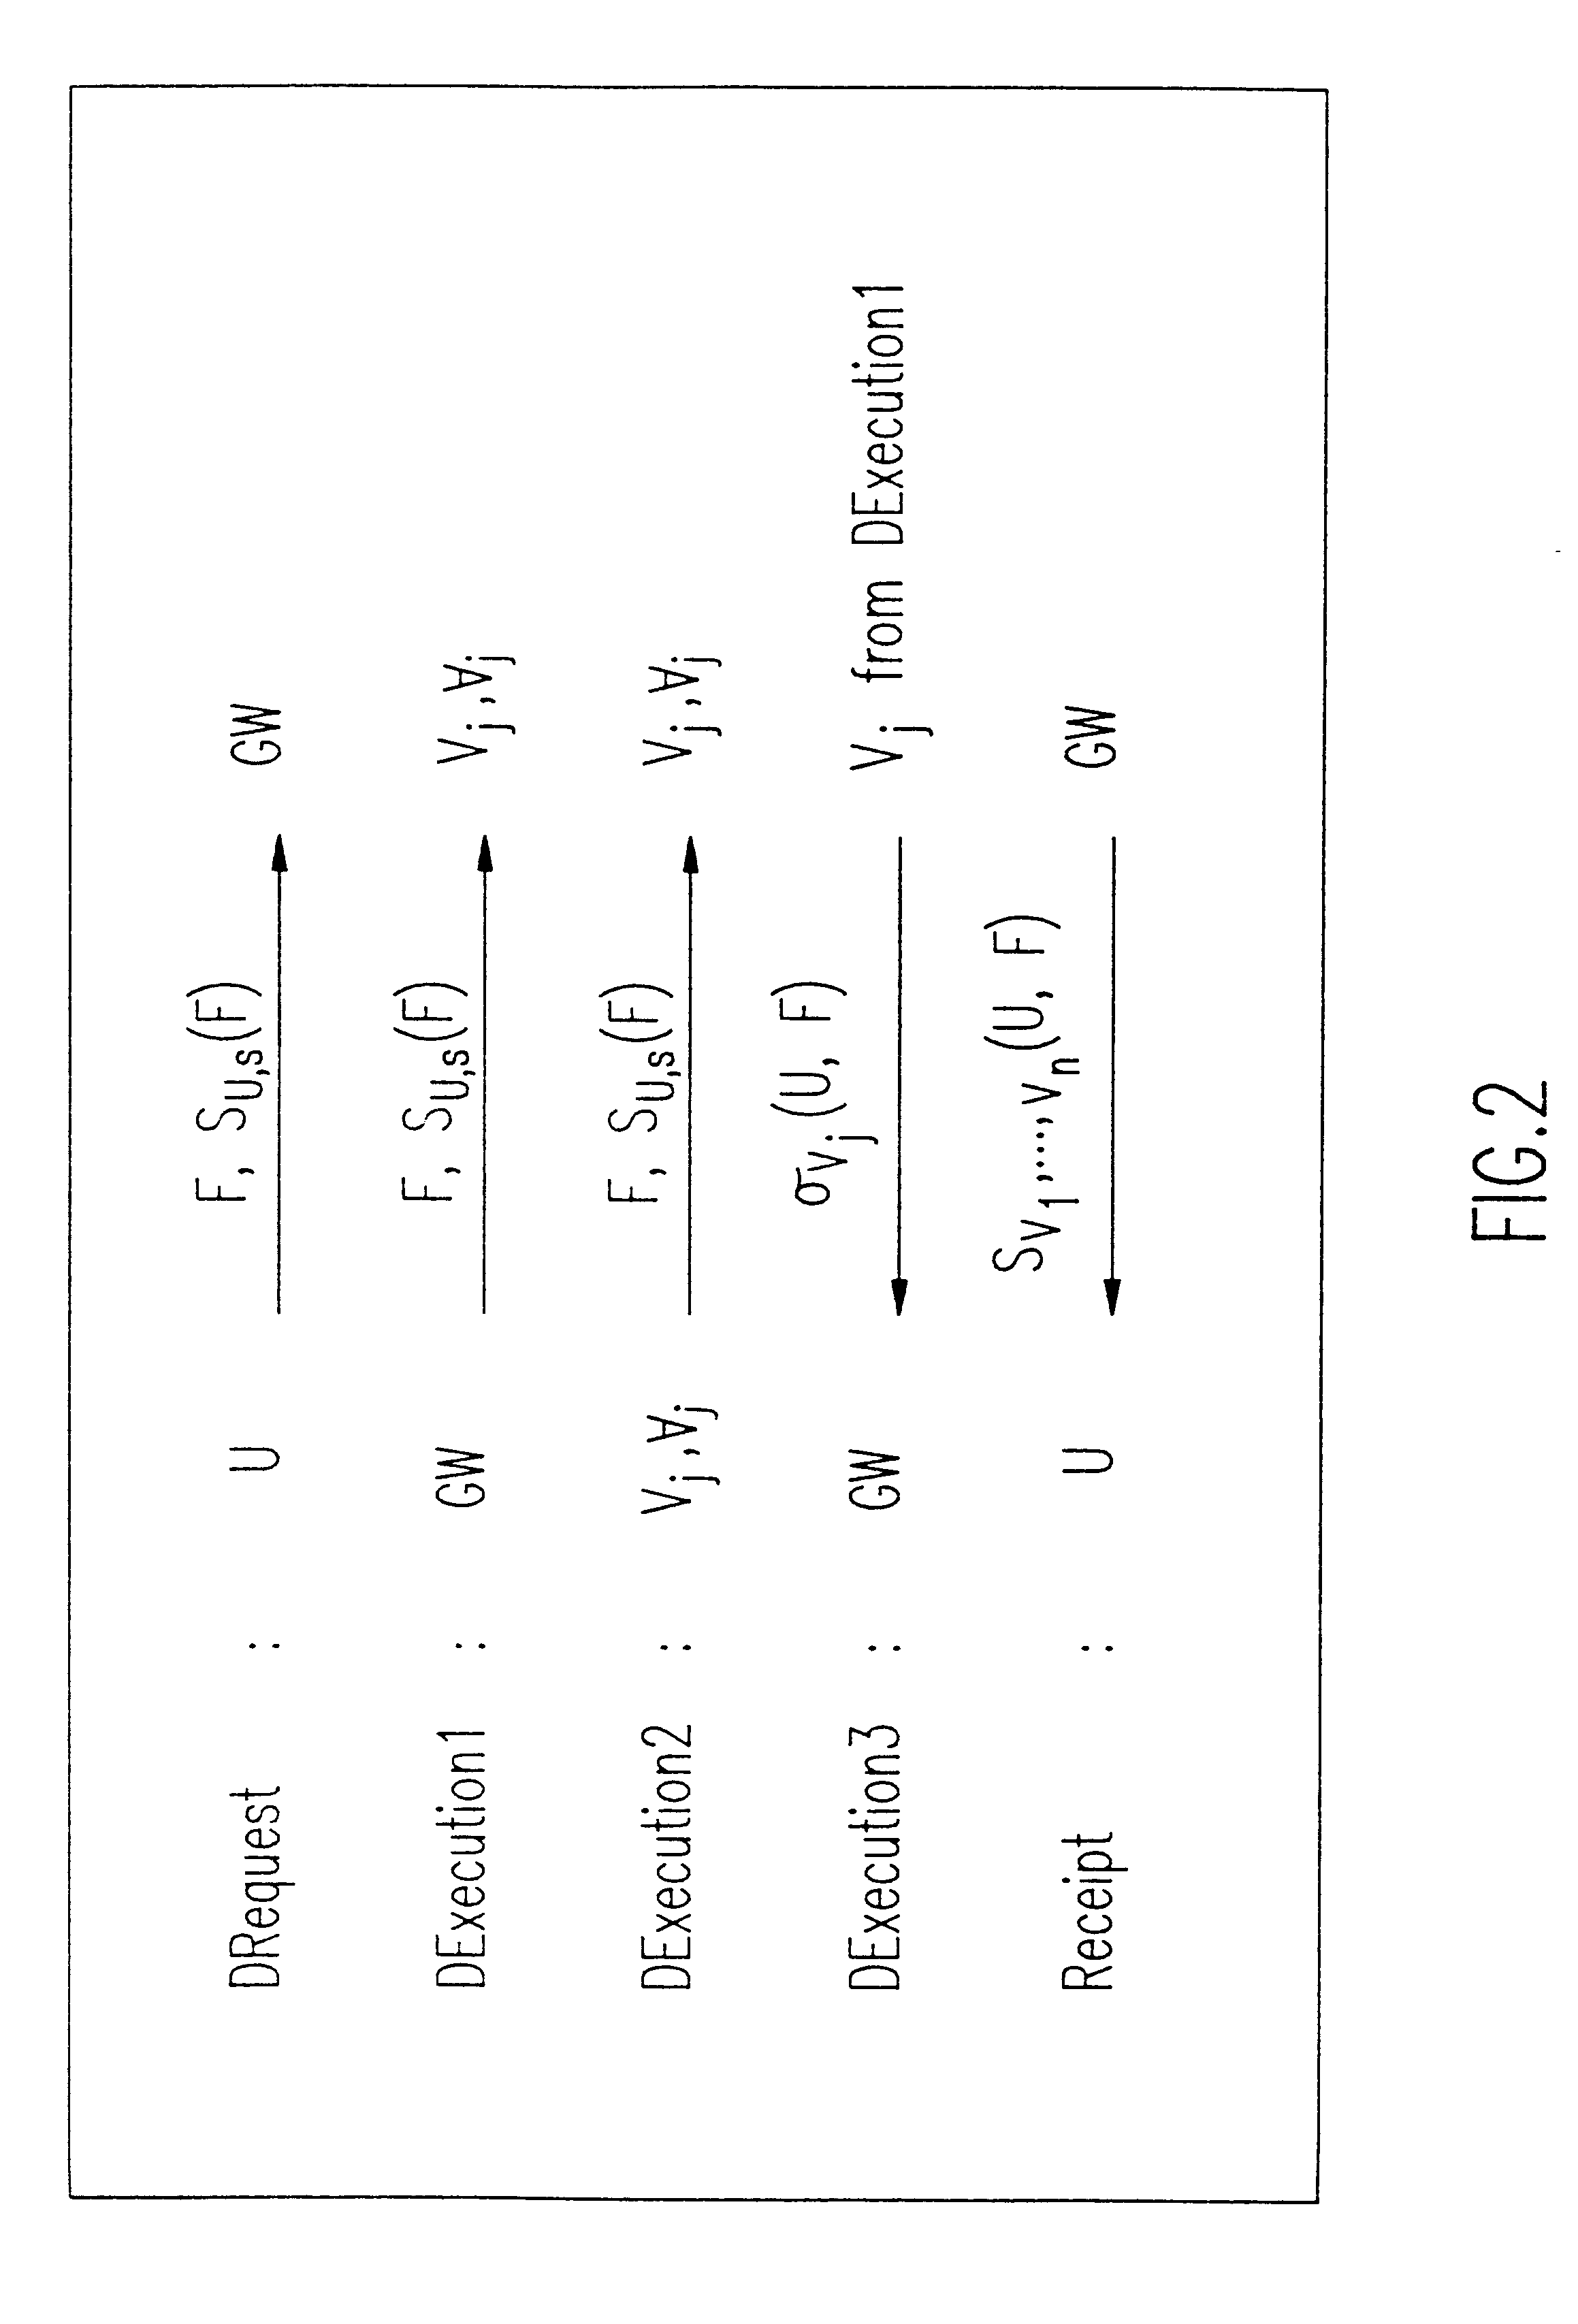 Method and apparatus for the secure distributed storage and retrieval of information